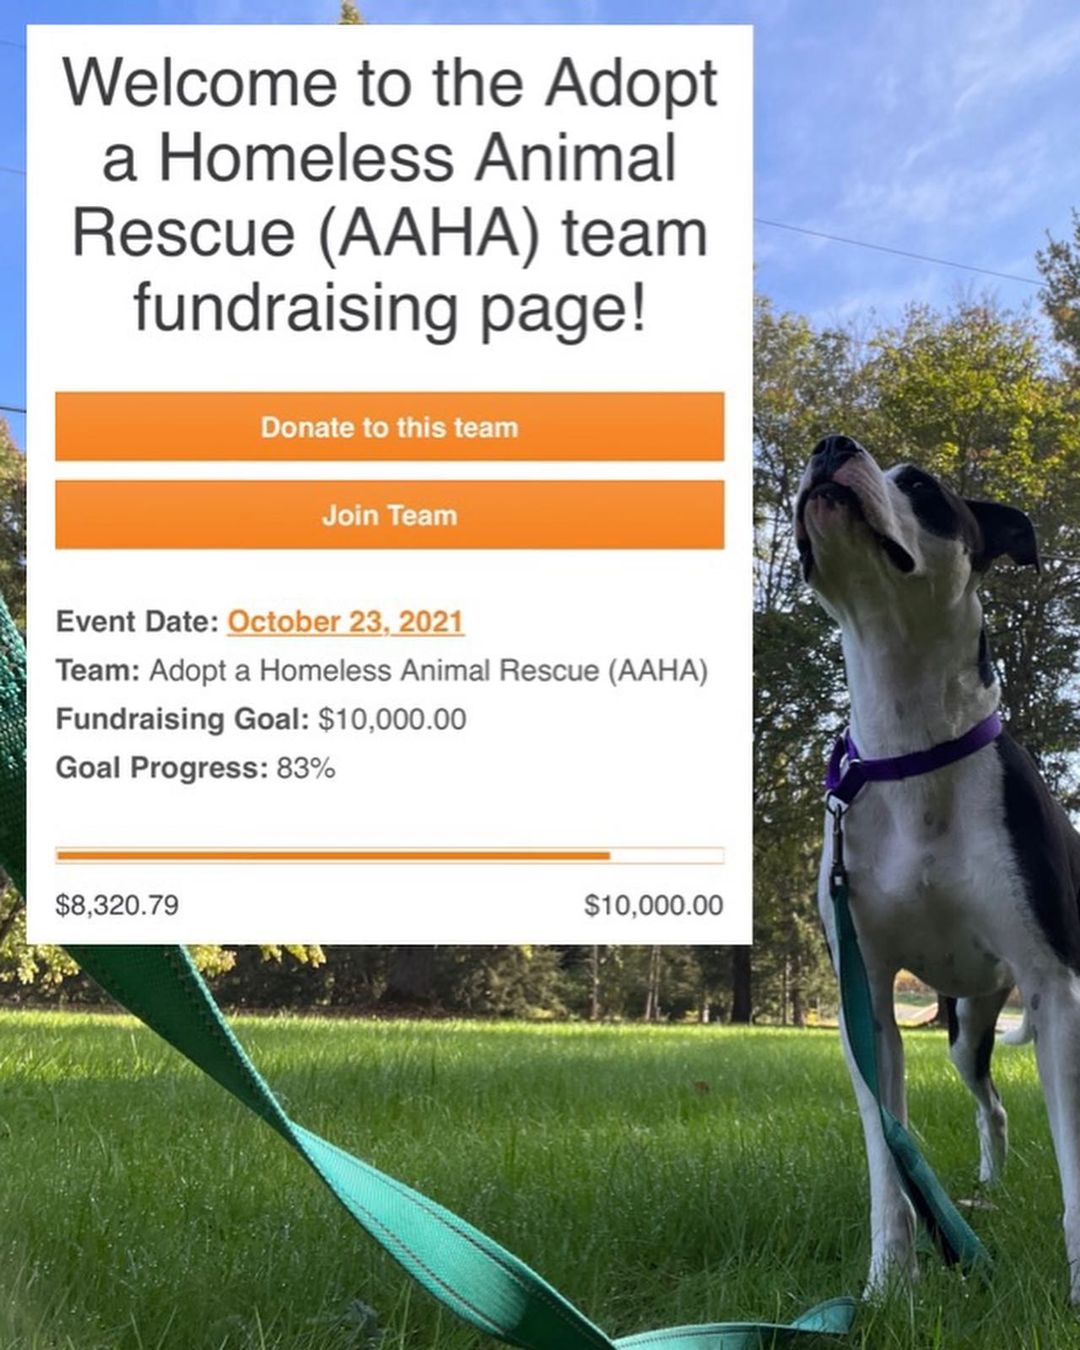 The fundraiser ends TOMORROW so this is our last push to get closer to our goal of raising $10,000 for the pups of AAHA Rescue. We have had a lot of medical needs that have drained our account. Any amount you can donate will allow us to help these pups in dire need of rescue.

YOU can make a difference today by partnering with AAHA Rescue. 
HUGE THANK YOU to everyone that has already supported our mission ! <a target='_blank' href='https://www.instagram.com/explore/tags/linkinbio/'>#linkinbio</a> <a target='_blank' href='https://www.instagram.com/explore/tags/bestfriendsanimalsociety/'>#bestfriendsanimalsociety</a> @bestfriendsanimalsociety <a target='_blank' href='https://www.instagram.com/explore/tags/rescuedog/'>#rescuedog</a> <a target='_blank' href='https://www.instagram.com/explore/tags/savethemall/'>#savethemall</a>